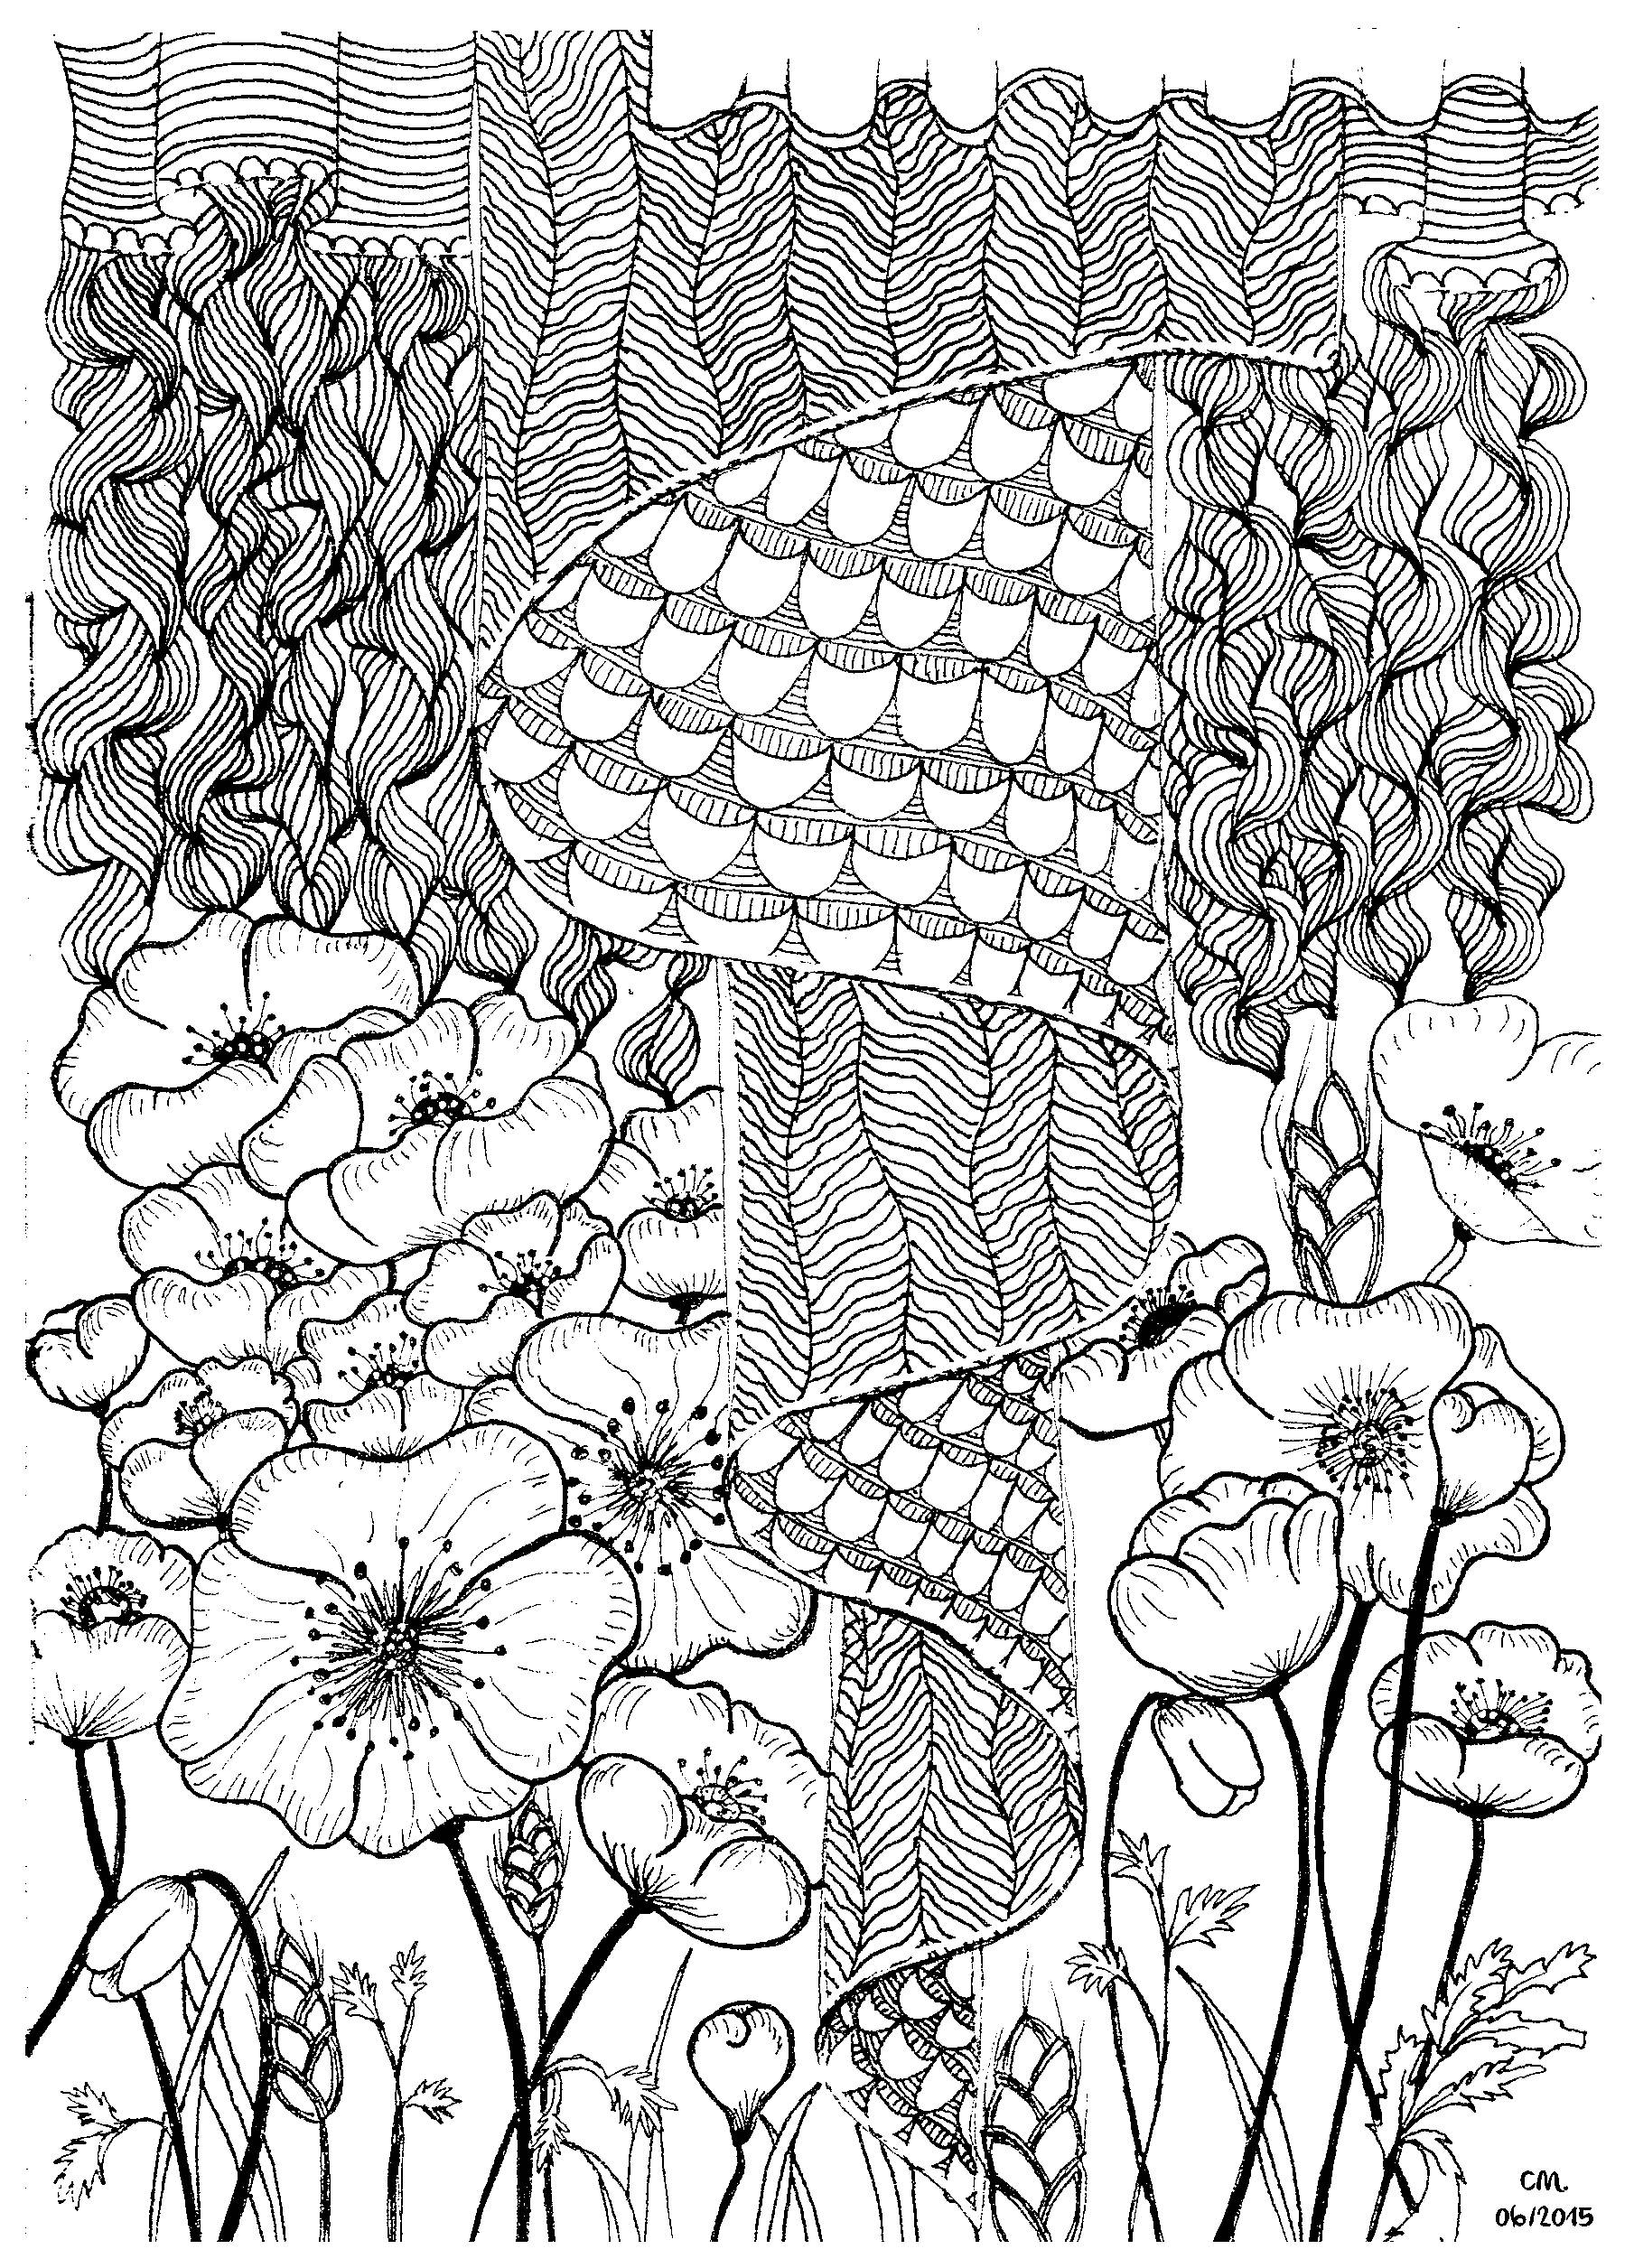 'Poppies', exclusive coloring page, Artist : Cathy M